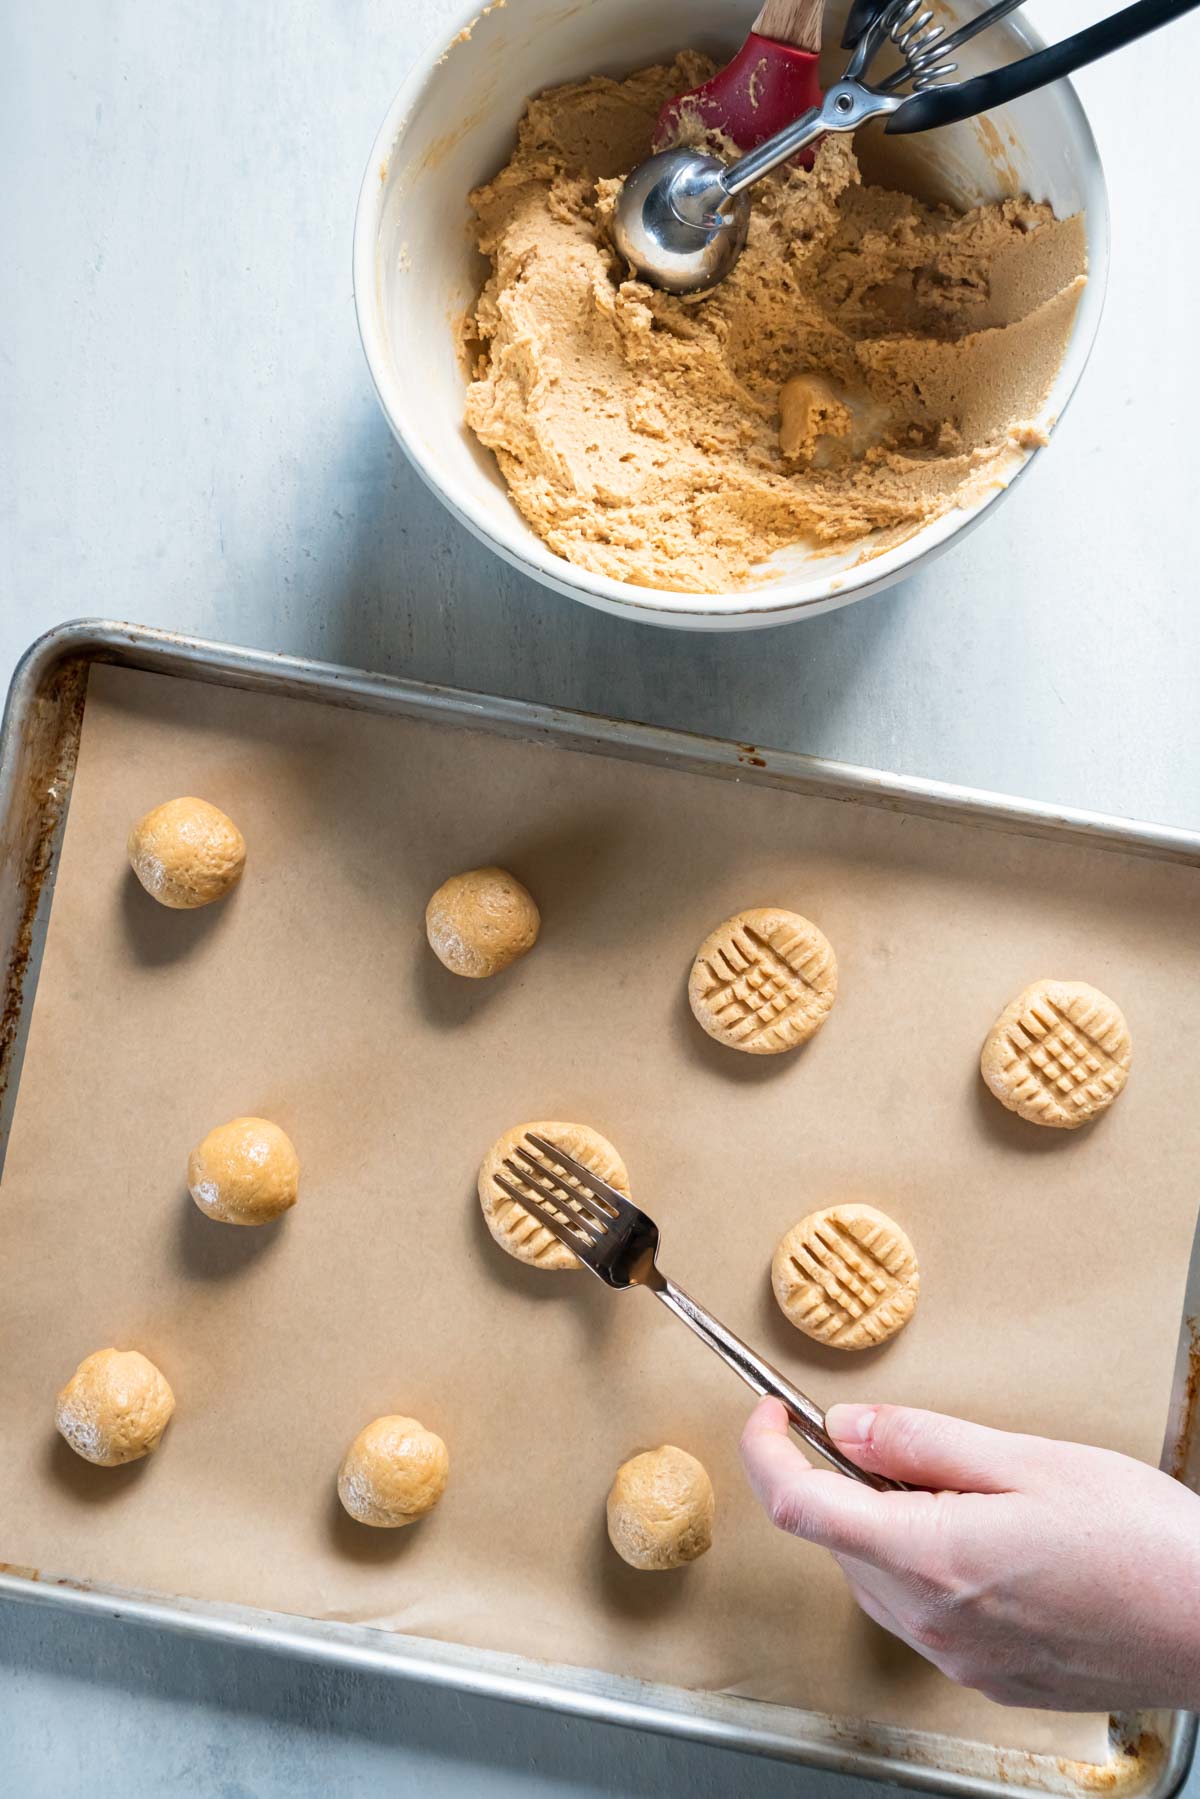 Making crisscross pattern on cookie dough balls on baking sheet with a fork.